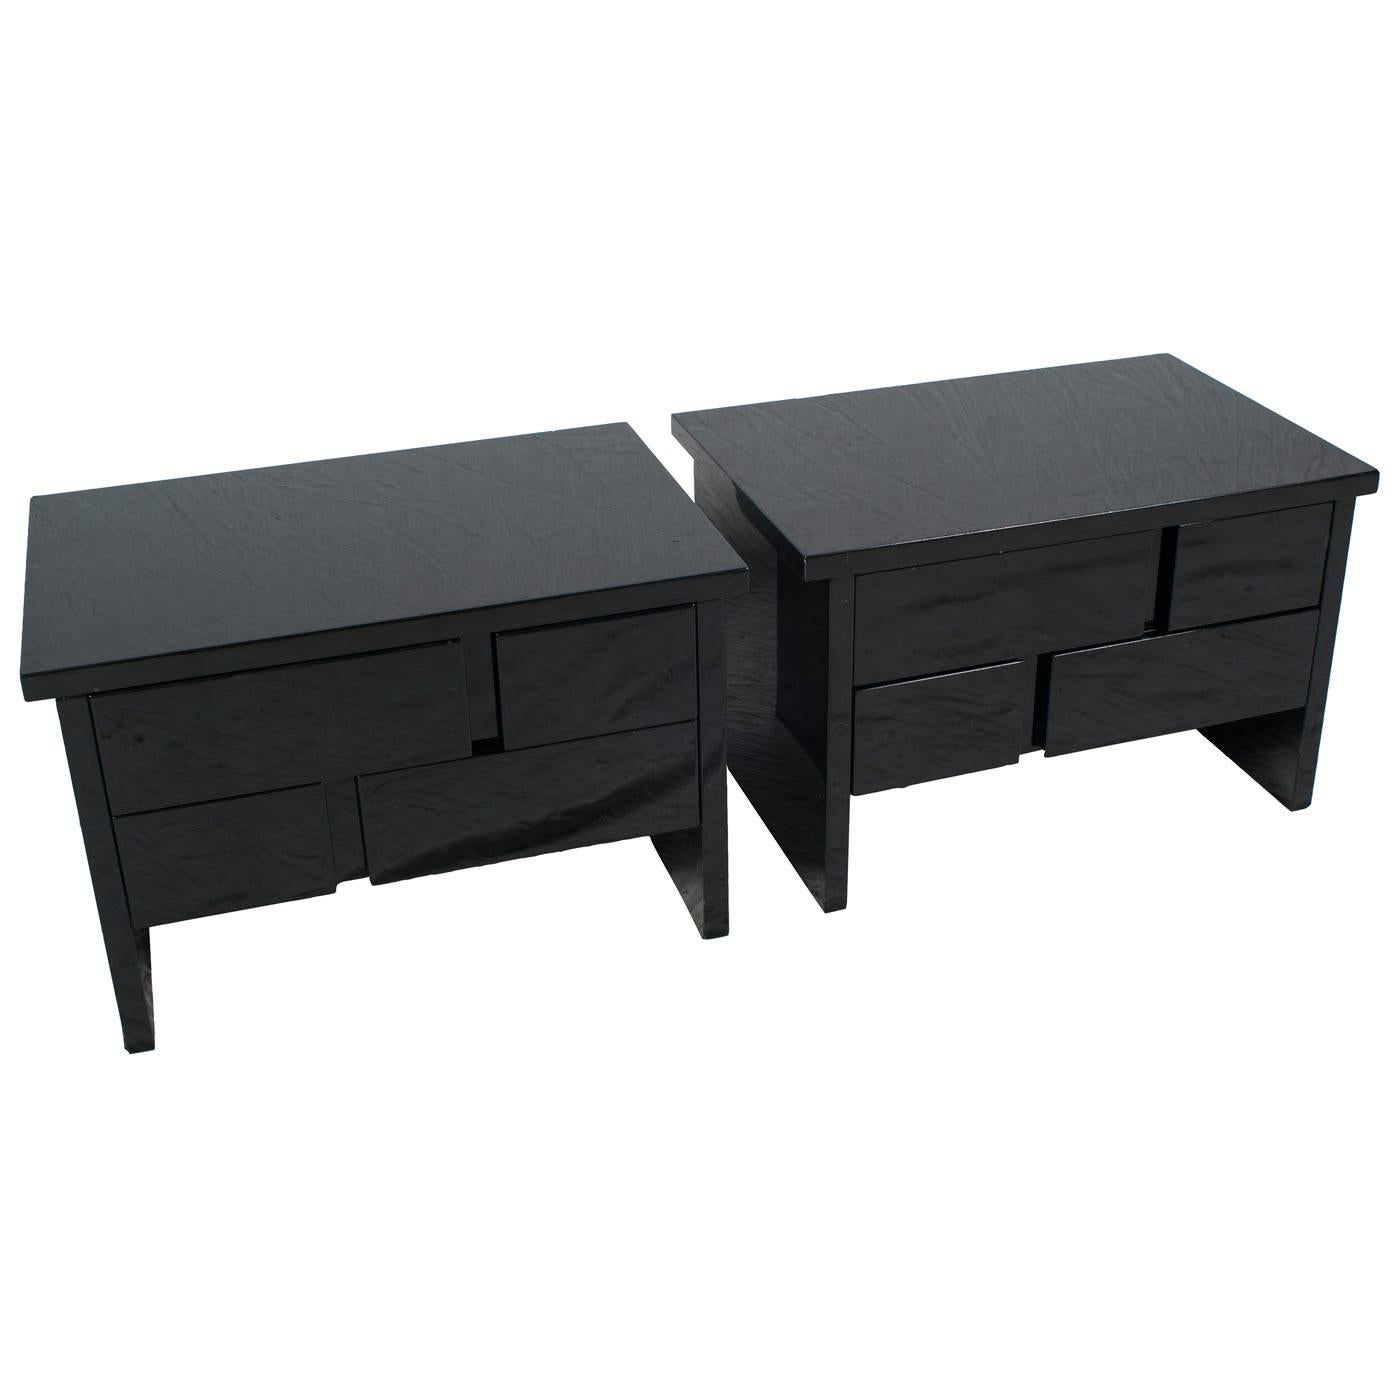 Pair of Black Lacquer Side Tables or Nightstands